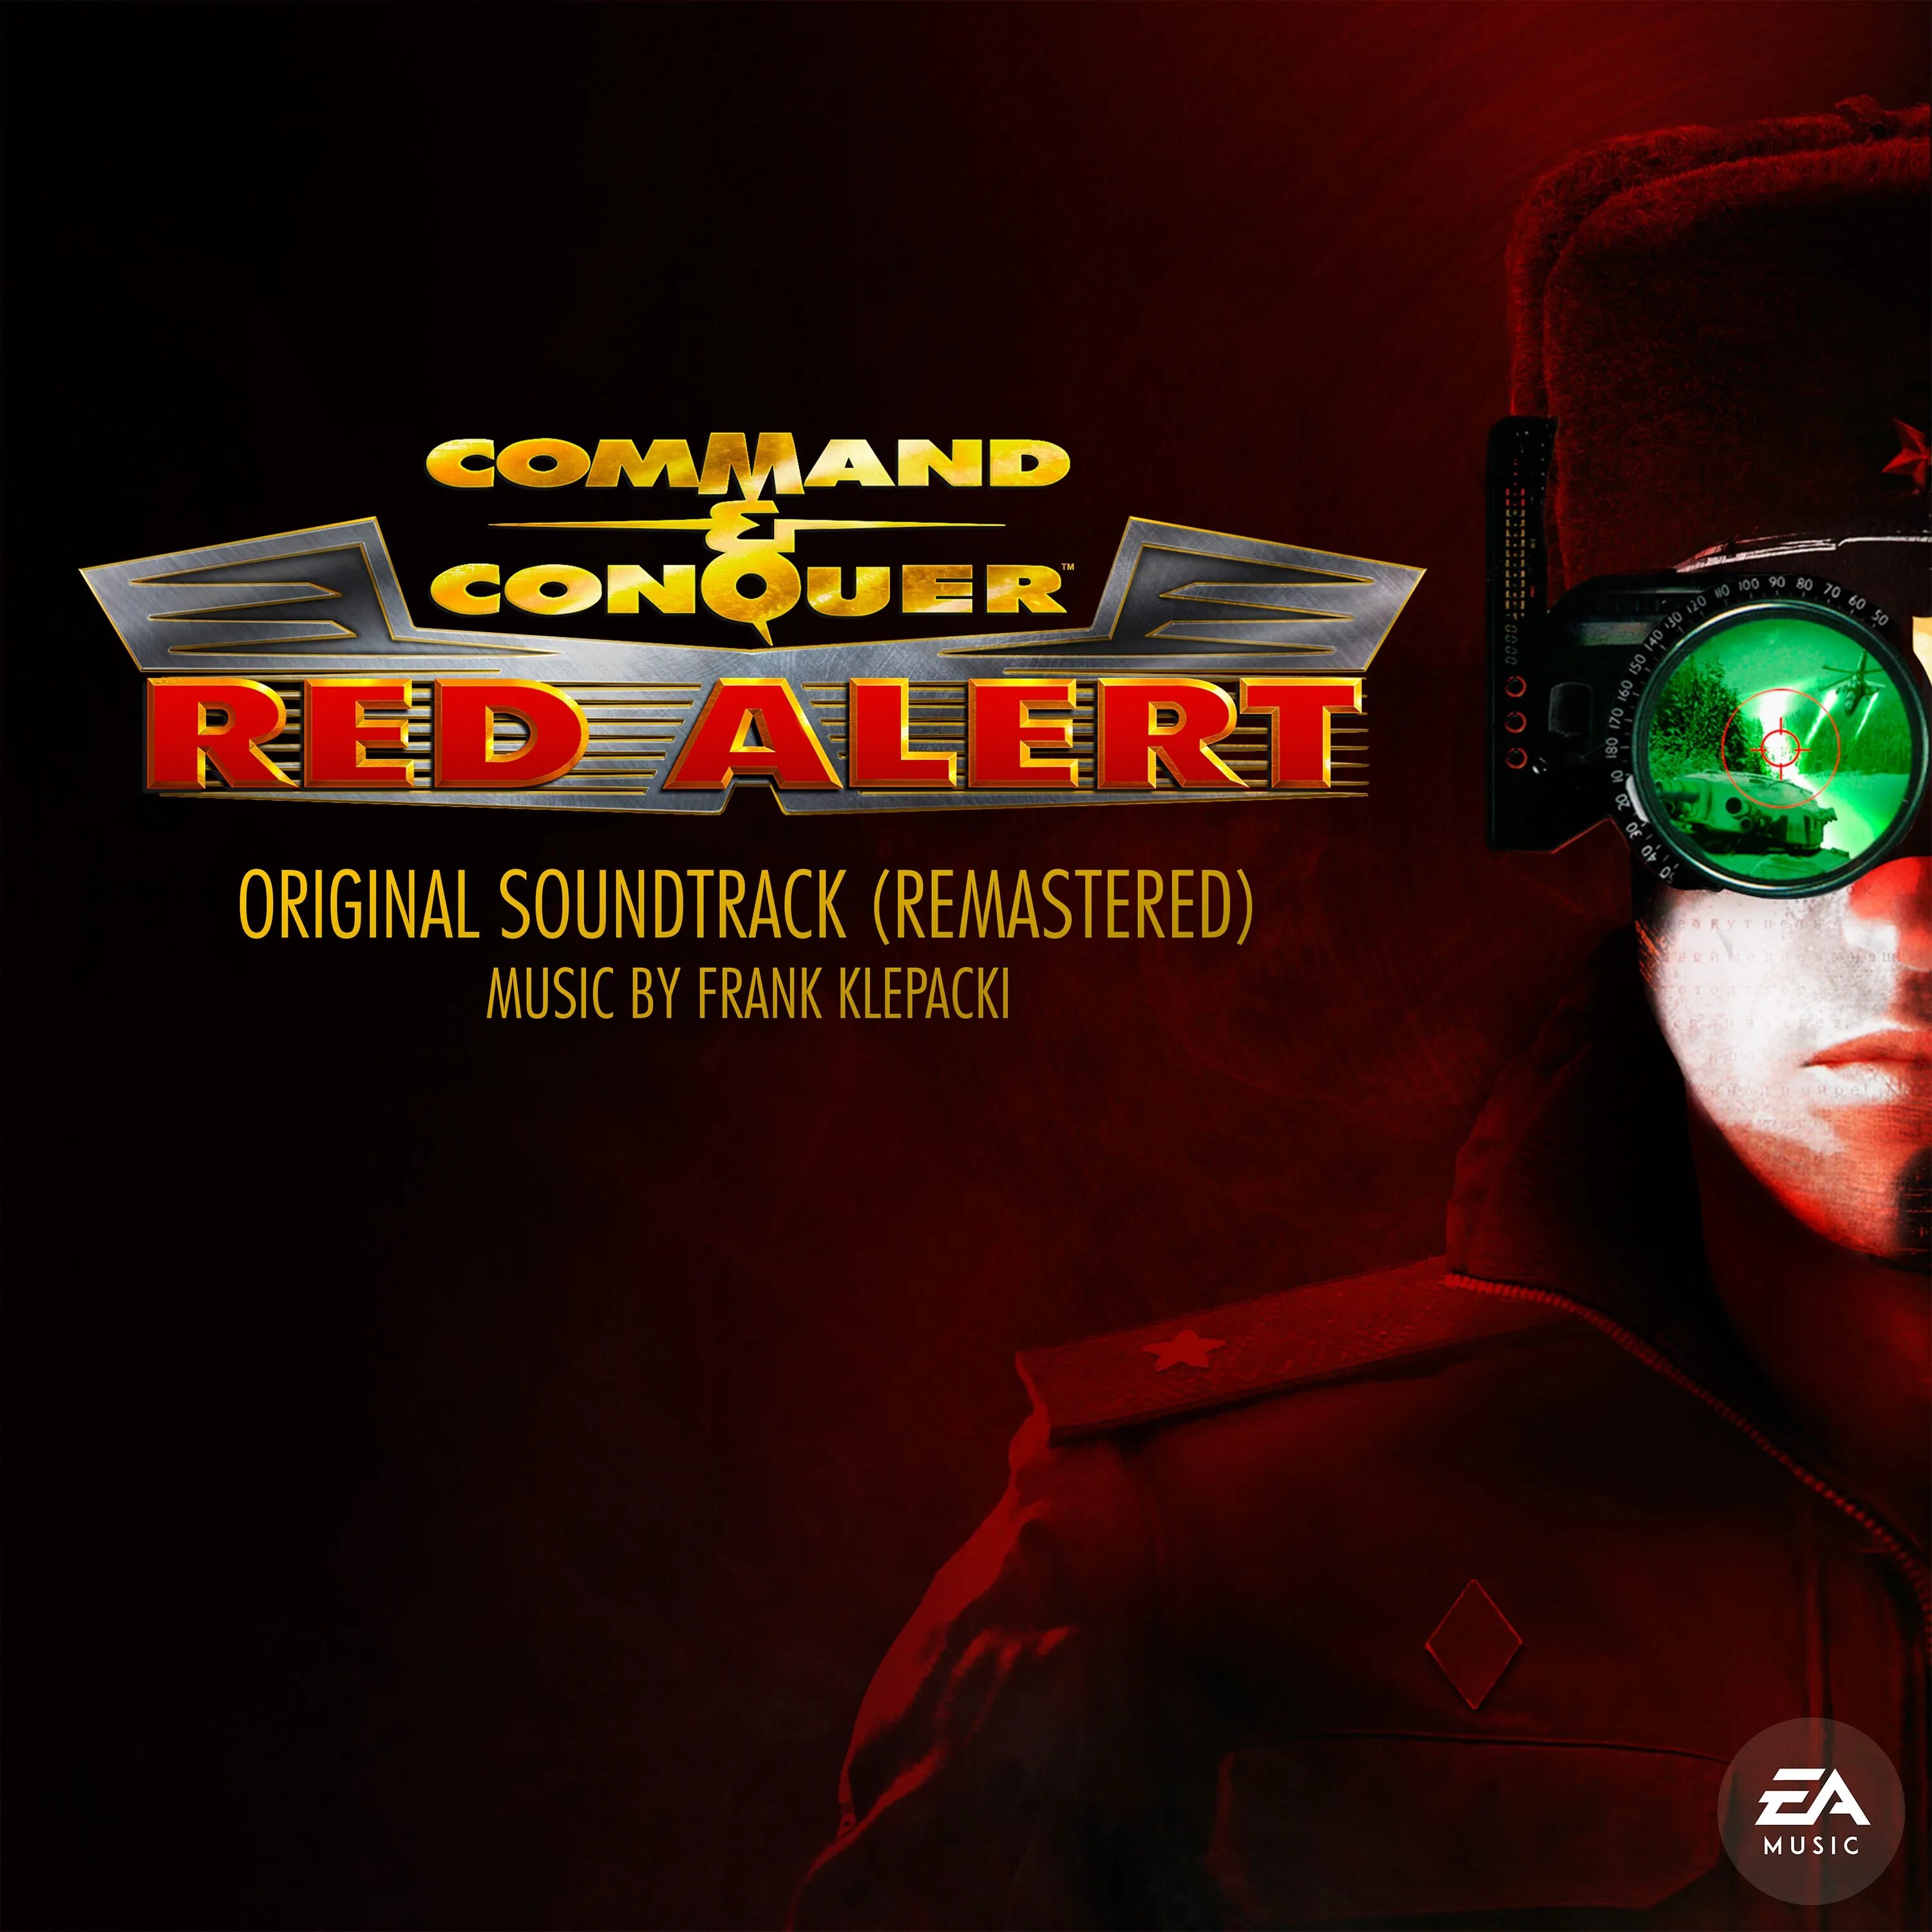 Red alert soundtrack. Франк Клепацкий. Command & Conquer Фрэнк Клепаки. Command and Conquer Remastered. Red Alert Soundtrack Фрэнк Клепаки.